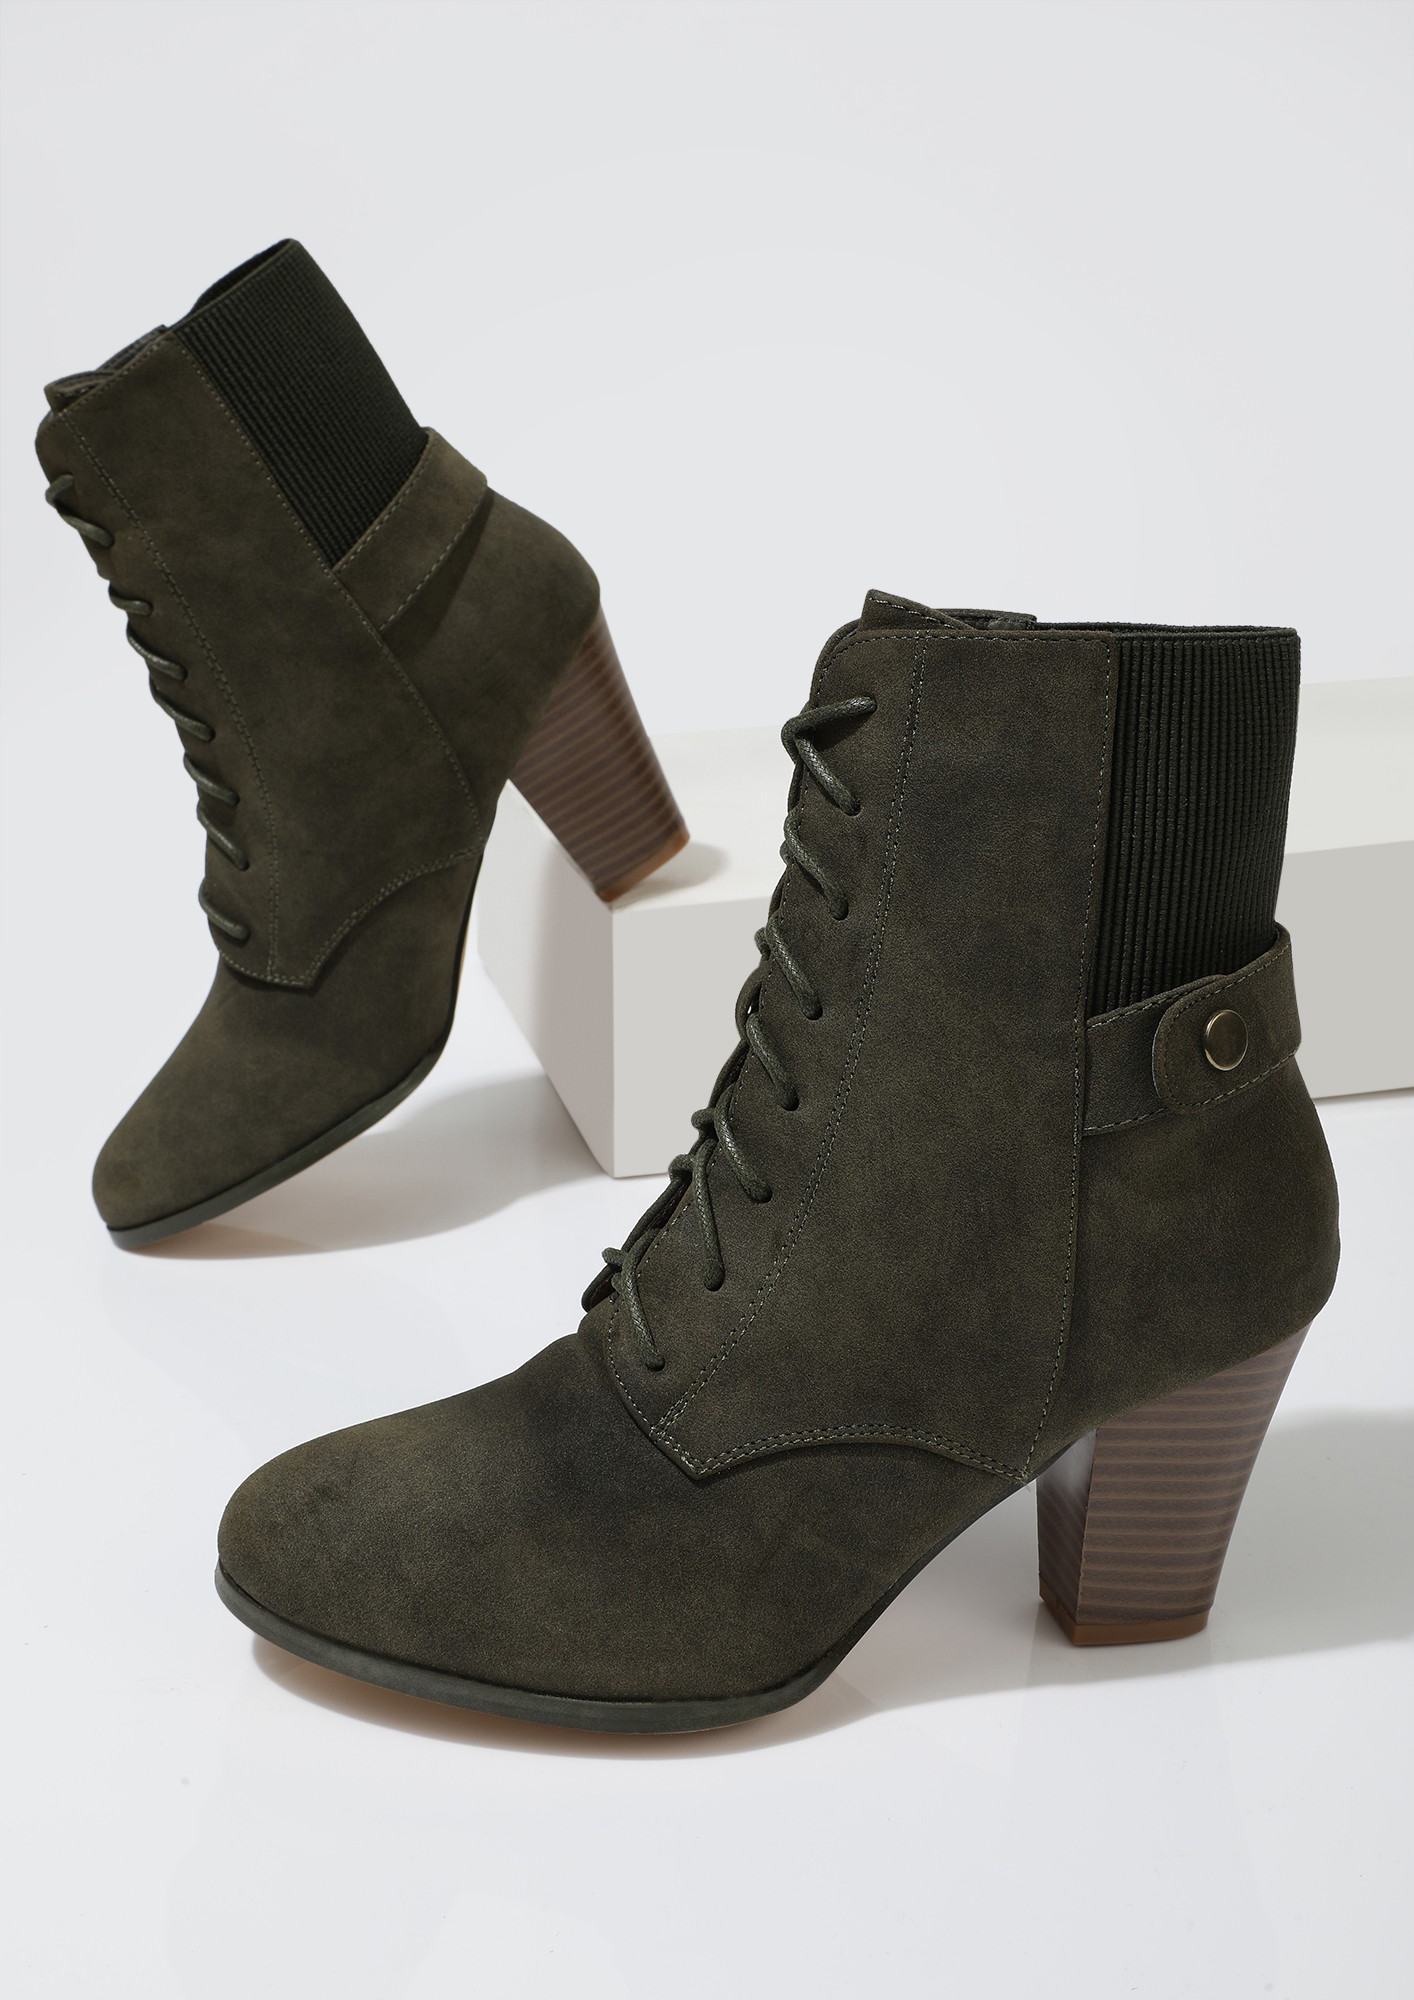 SLAY WITH GREEN ANKLE BOOTS